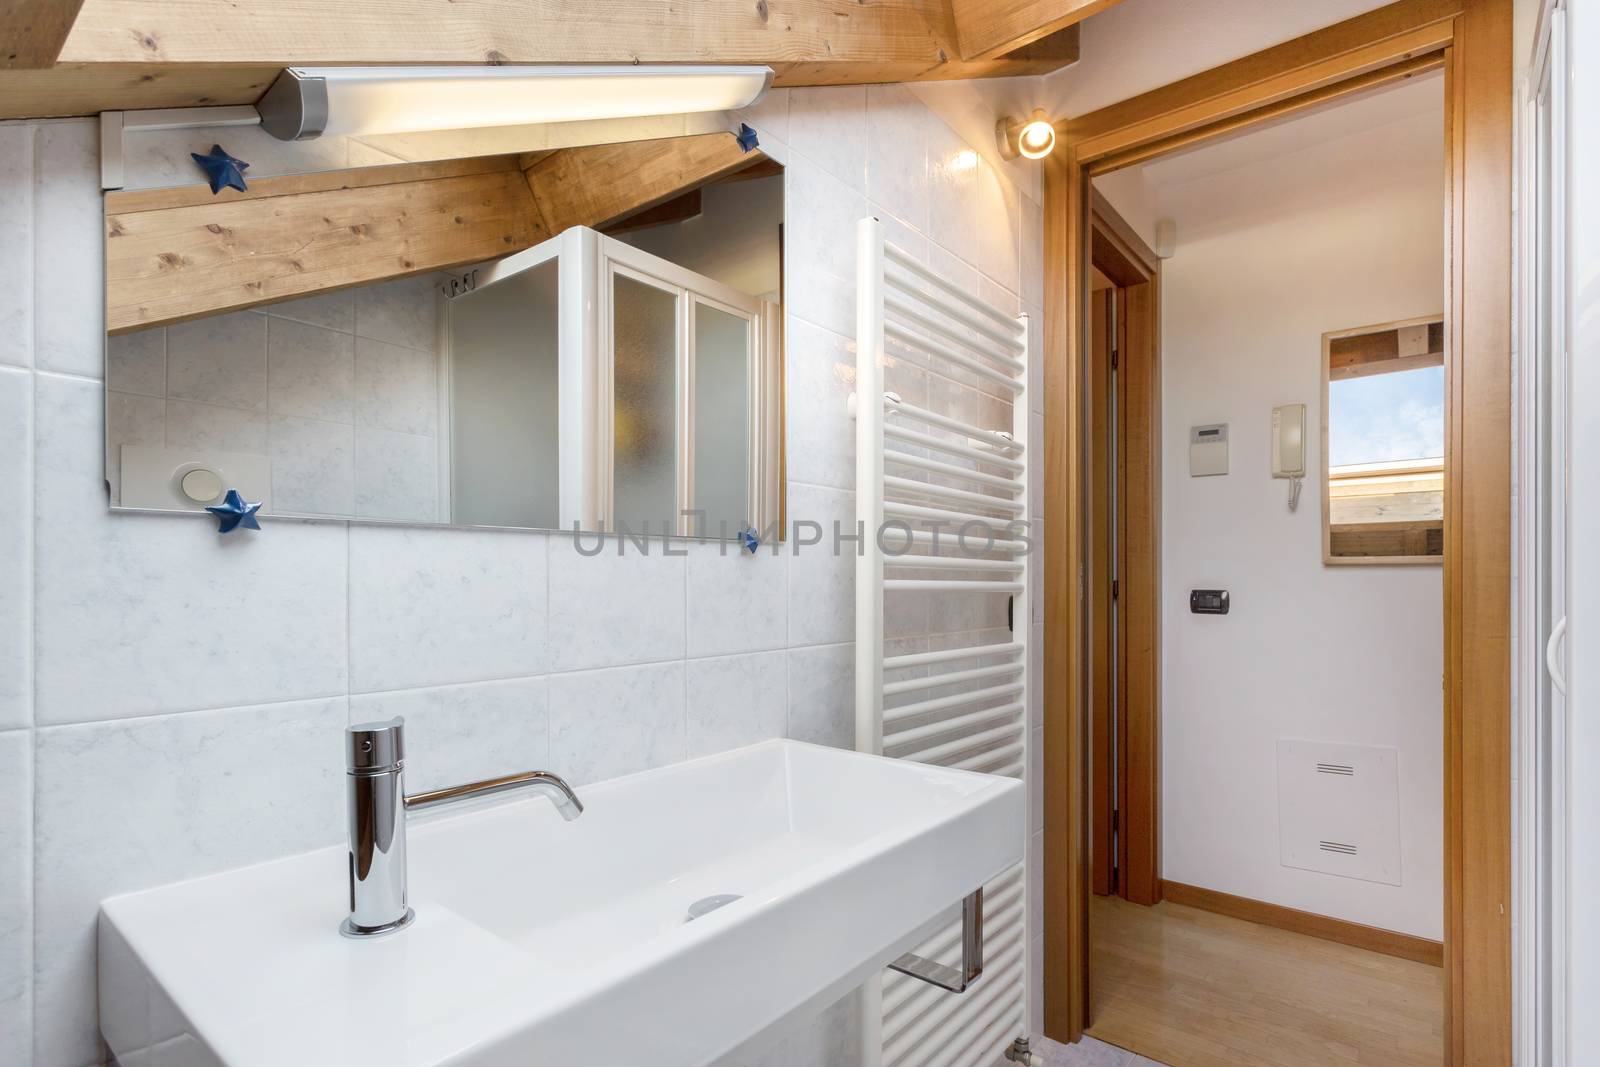 Practical and cozy bathroom with towel radiator, toilet, cabinet and sink. Roof with exposed wooden beams. Classical italian design and style.